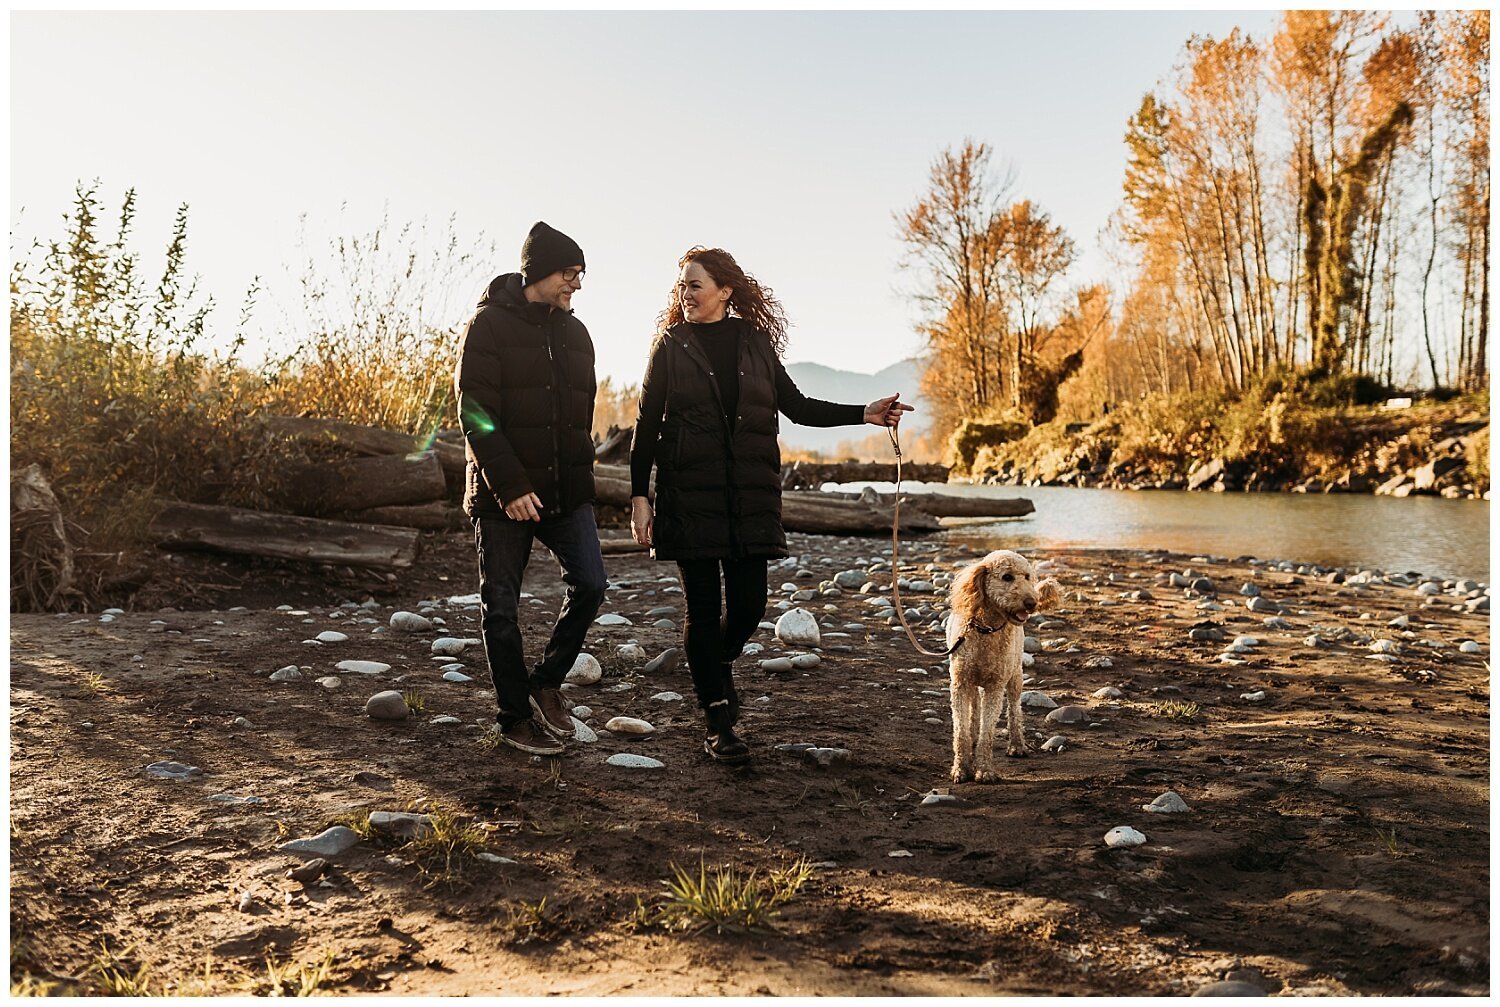 Vedder+River+Couples+-+Anna+Hurley+Photography+-+Chilliwack,+BC+1.jpg